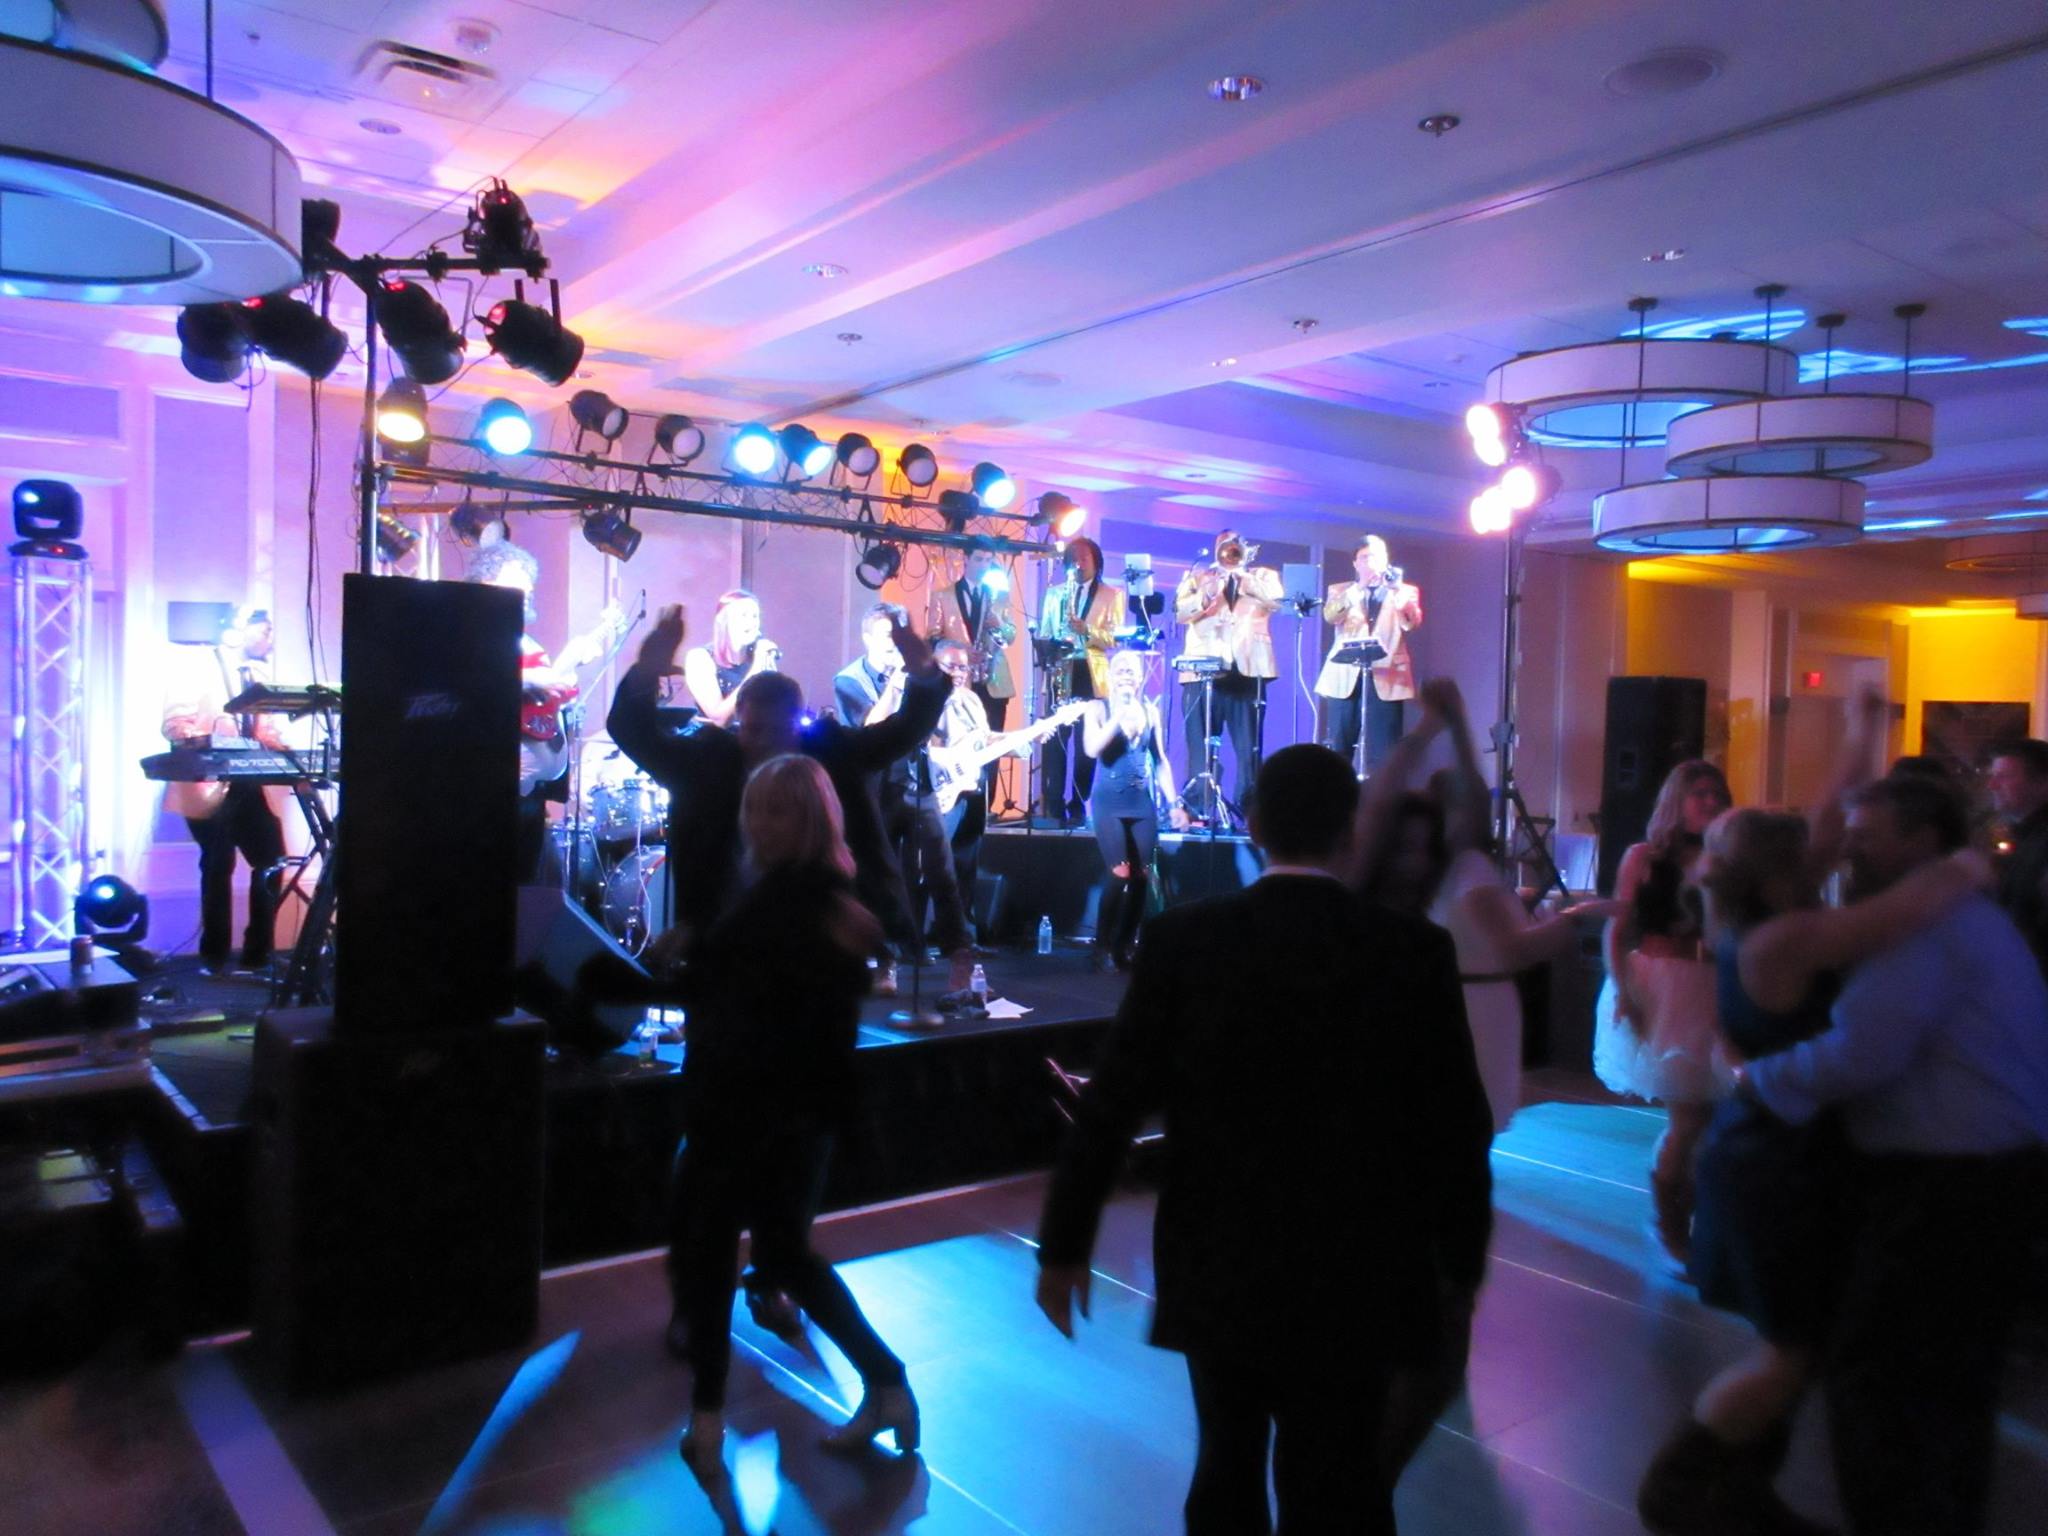 InsideOut Band playing at an event